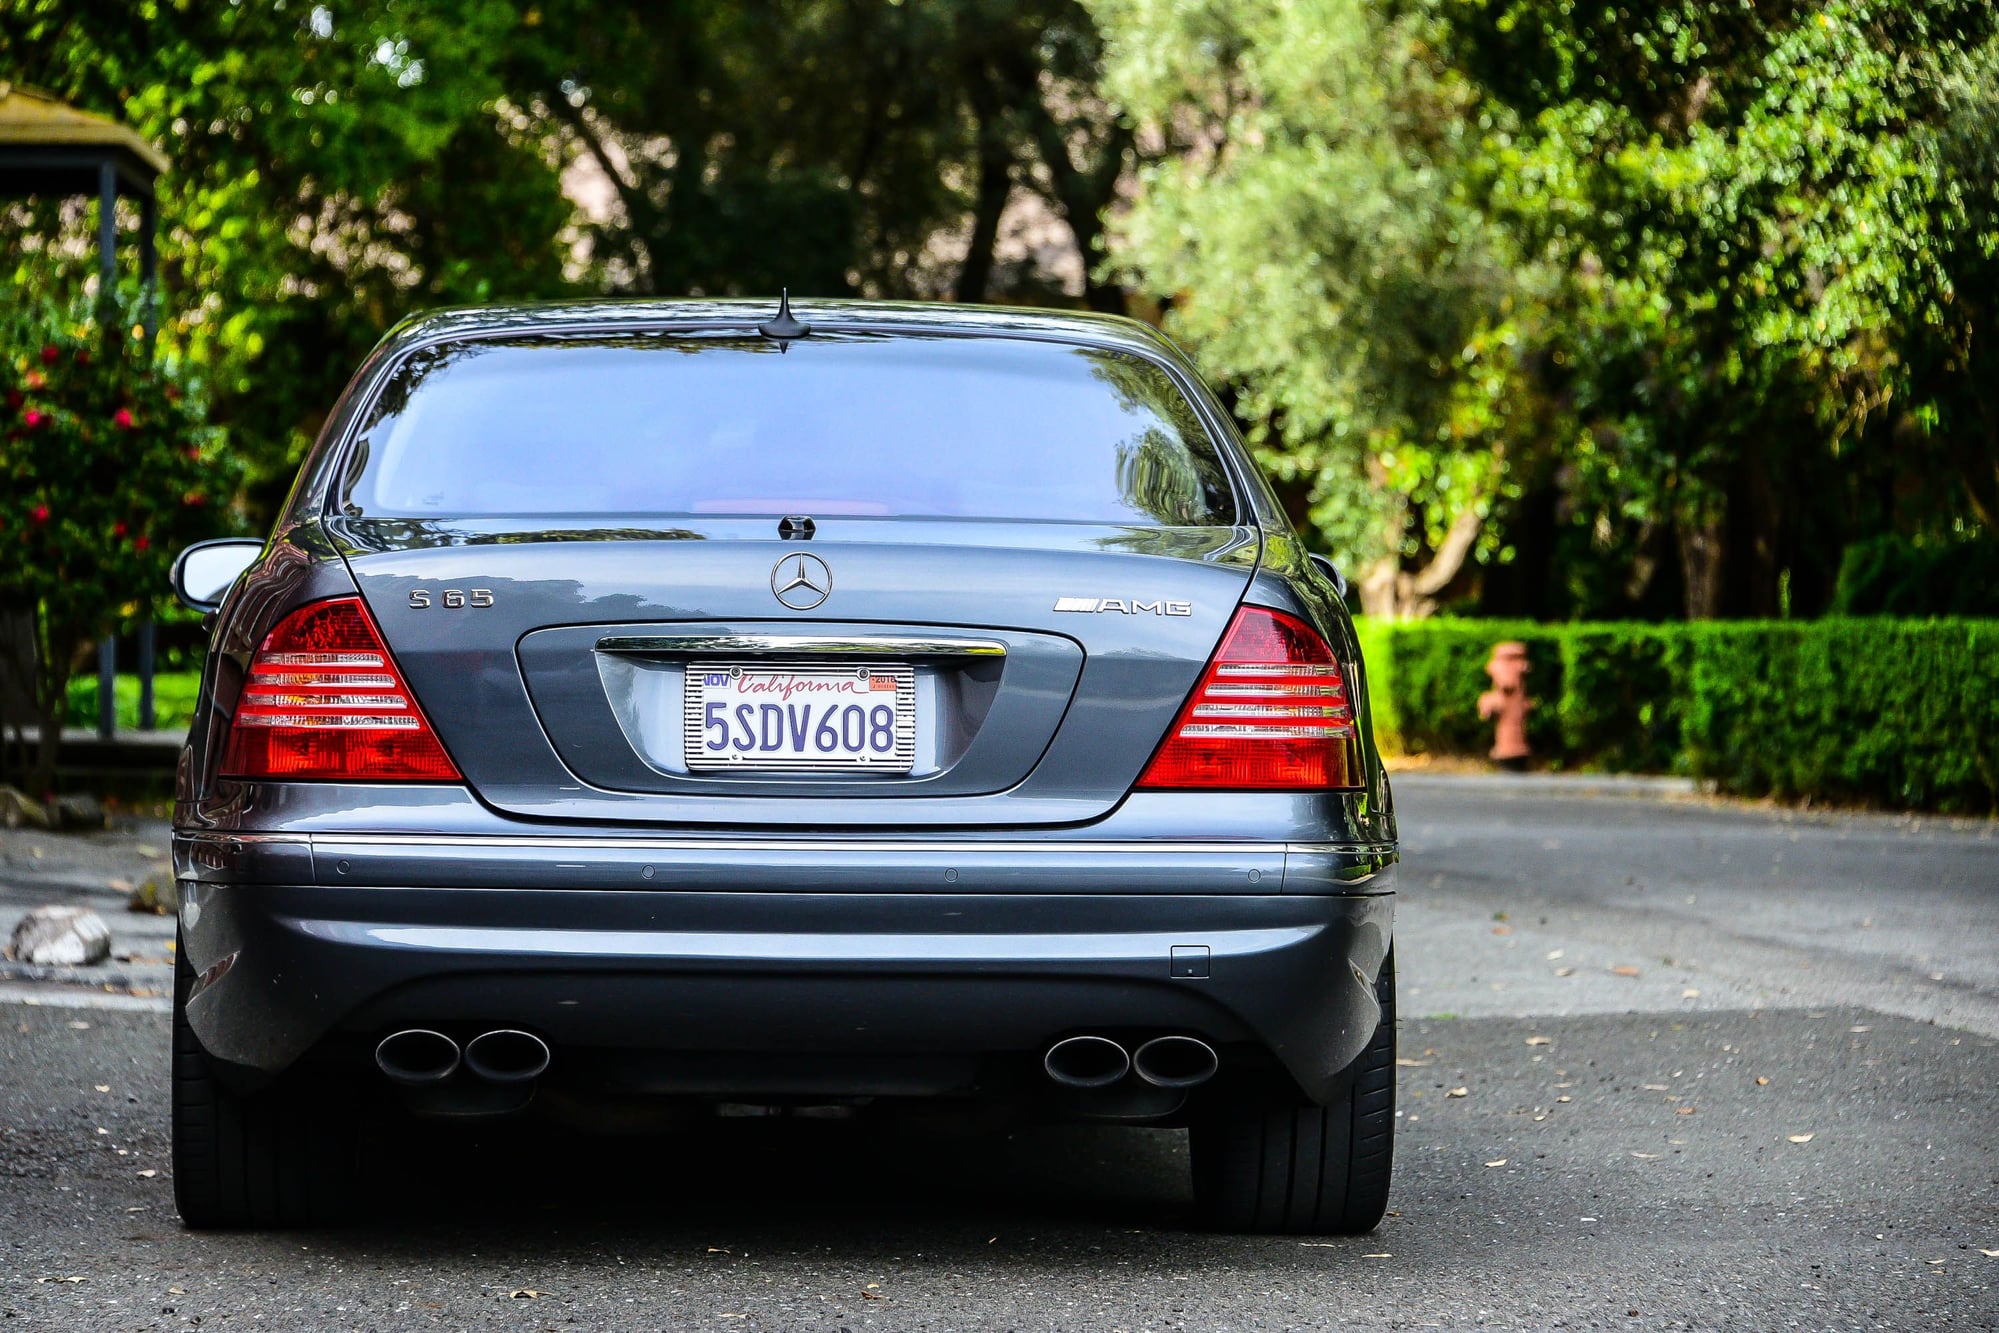 2006 Mercedes-Benz S65 AMG - FS: 2006 Mercedes S65 AMG - Designo Graphite Metallic, 68K miles - Used - VIN WDBNG79JX6A471936 - 68,000 Miles - 12 cyl - 2WD - Automatic - Menlo Park, CA 94025, United States